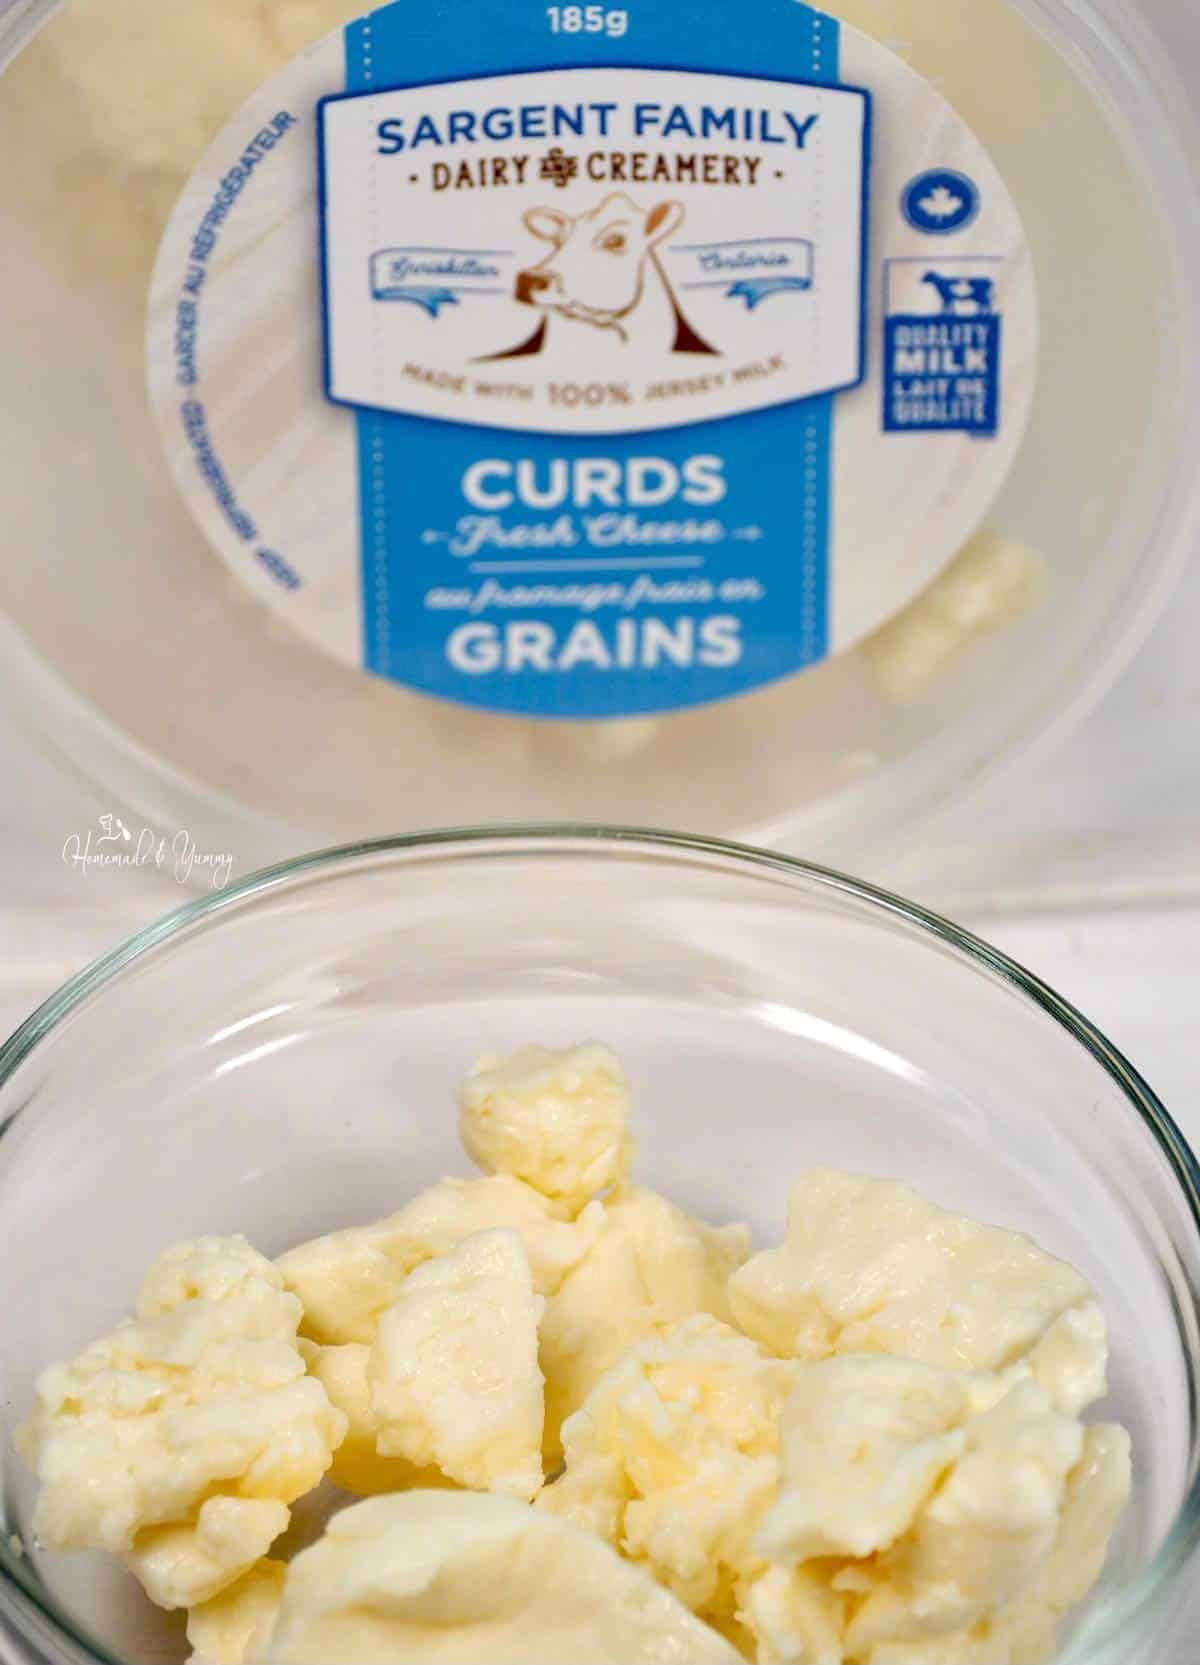 Cheese curds from Sargent Family Dairy